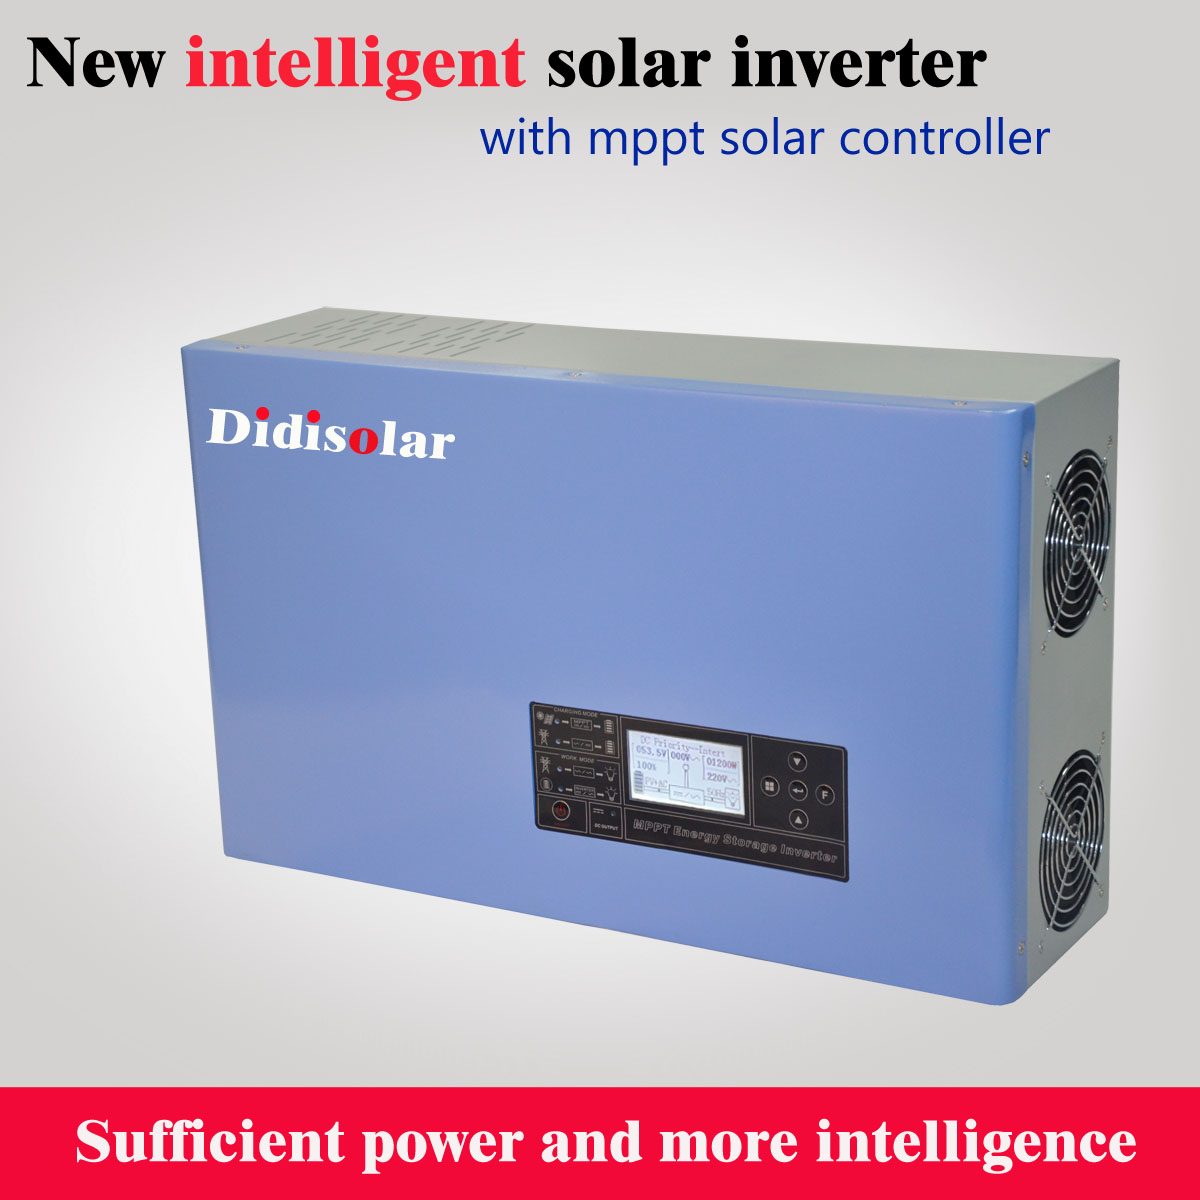 How to set up the lithium battery for Didisolar solar inverter